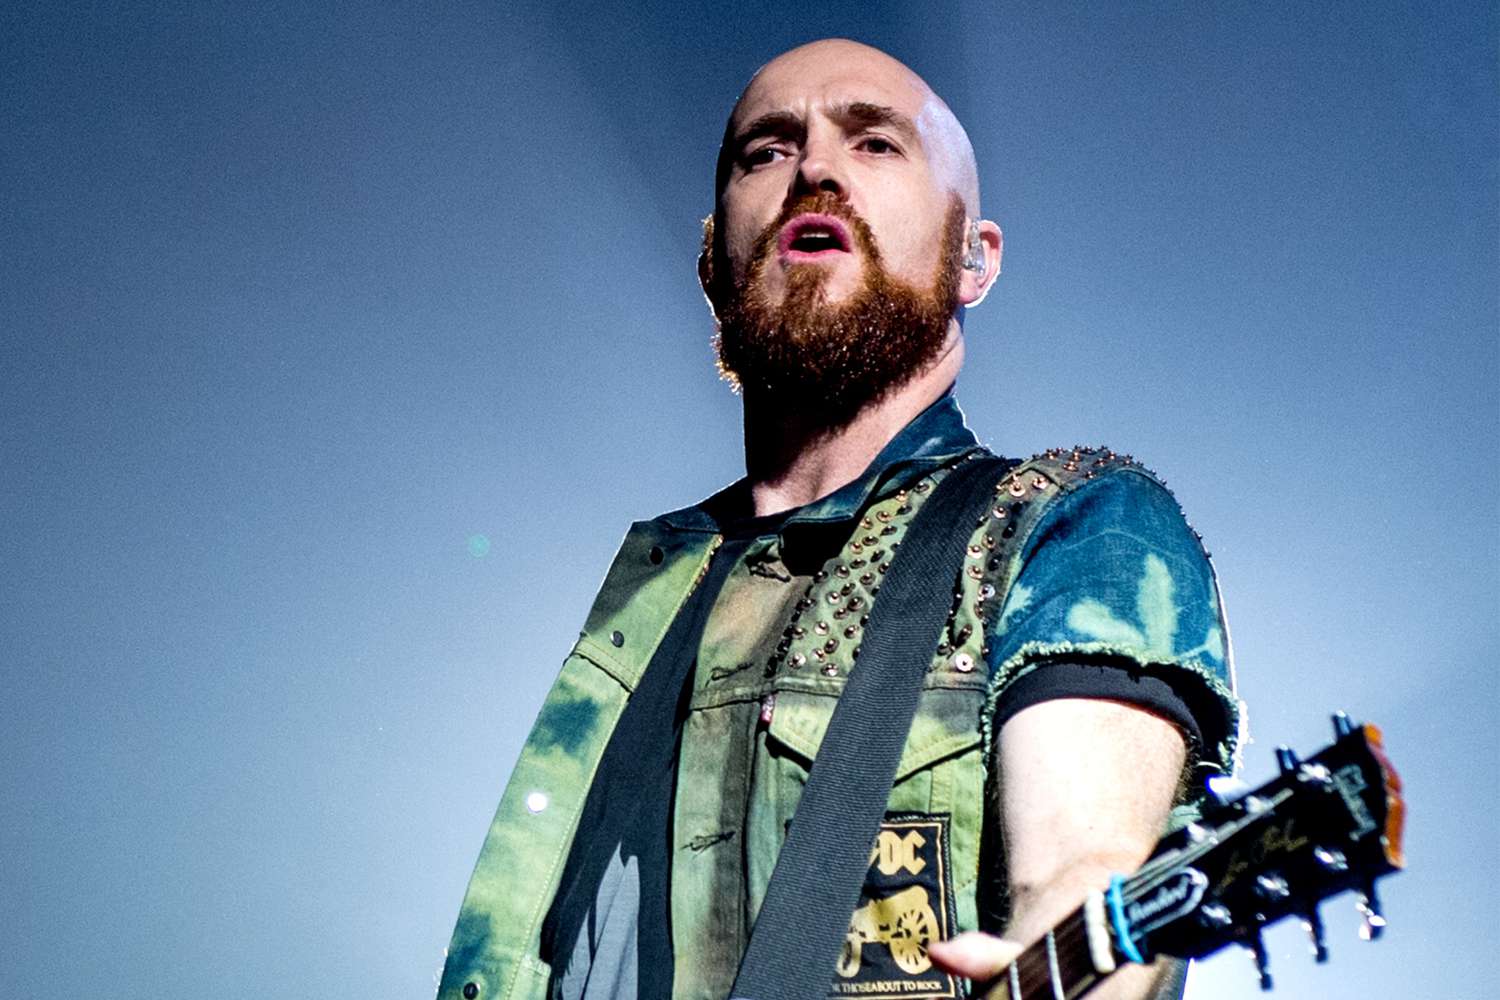 Mark Sheehan of The Script performs at Nottingham Capital FM Arena on March 3, 2015 in Nottingham, England